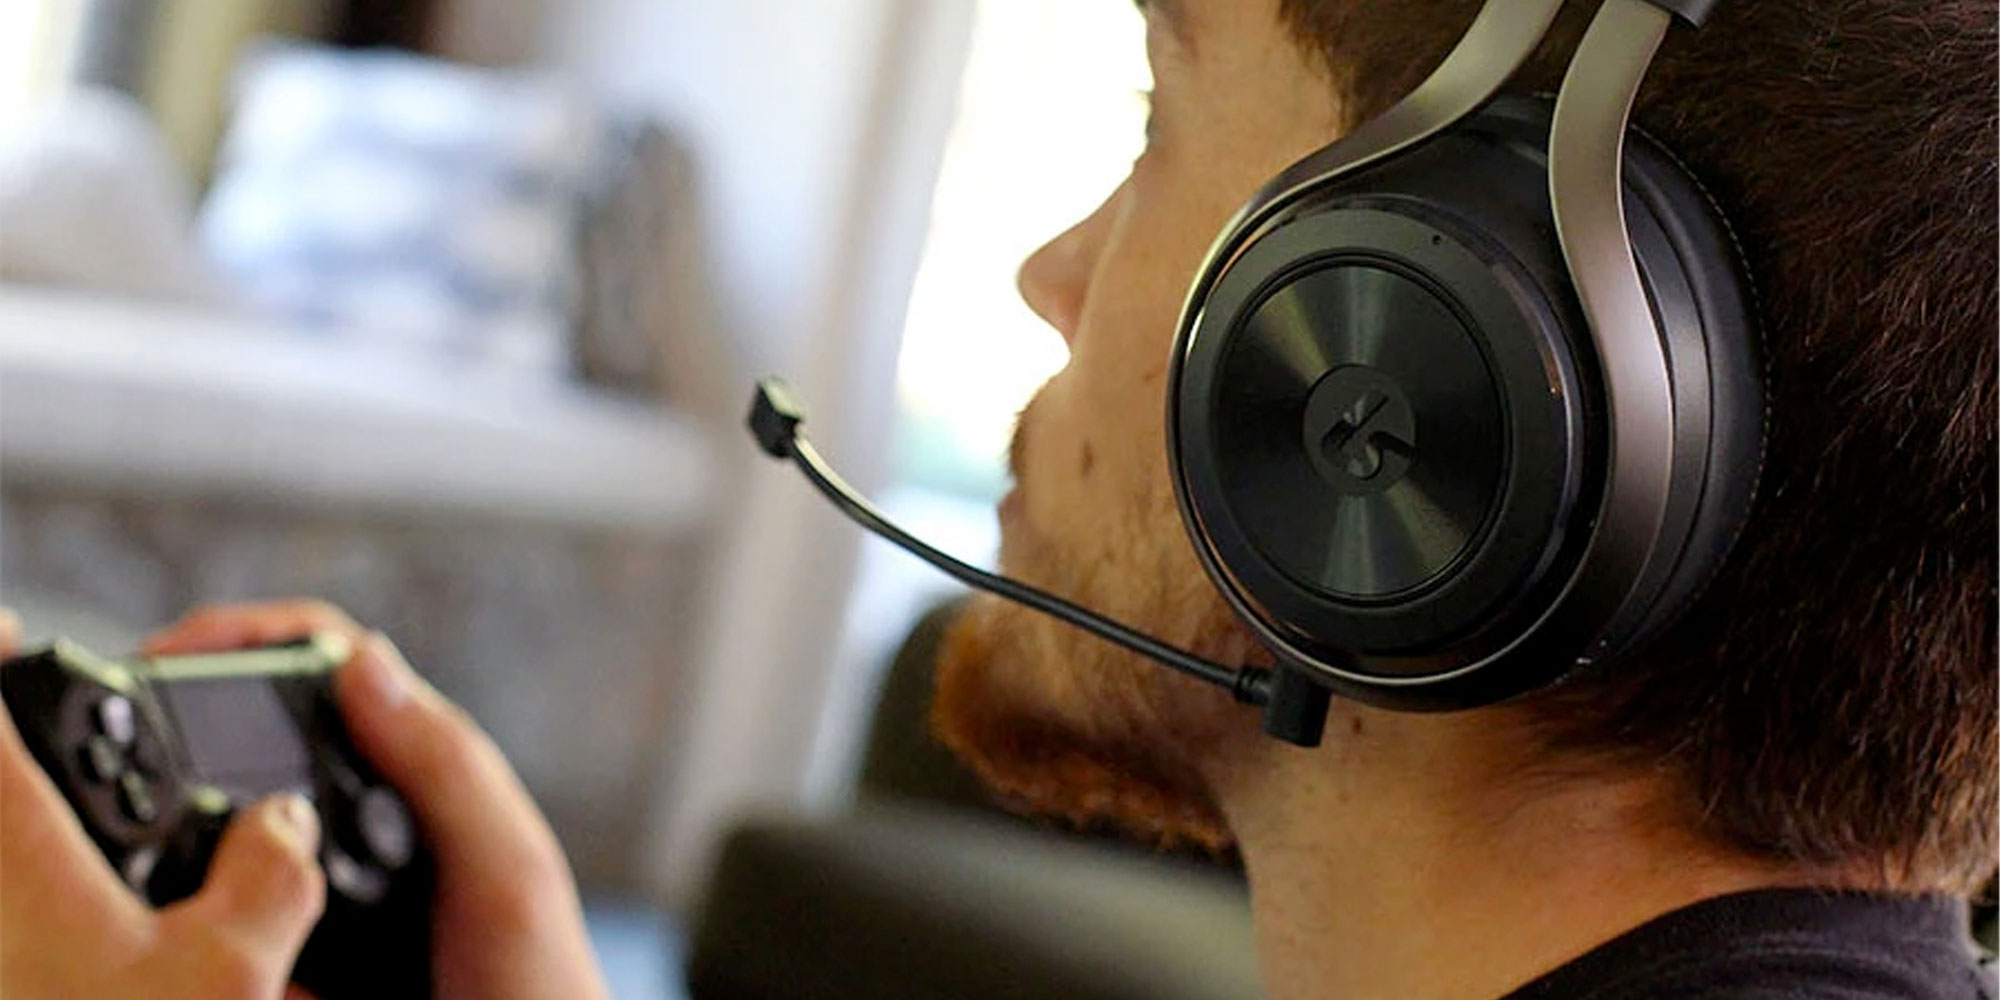 LucidSound's wireless PS4 headset hits an all-time low of $118